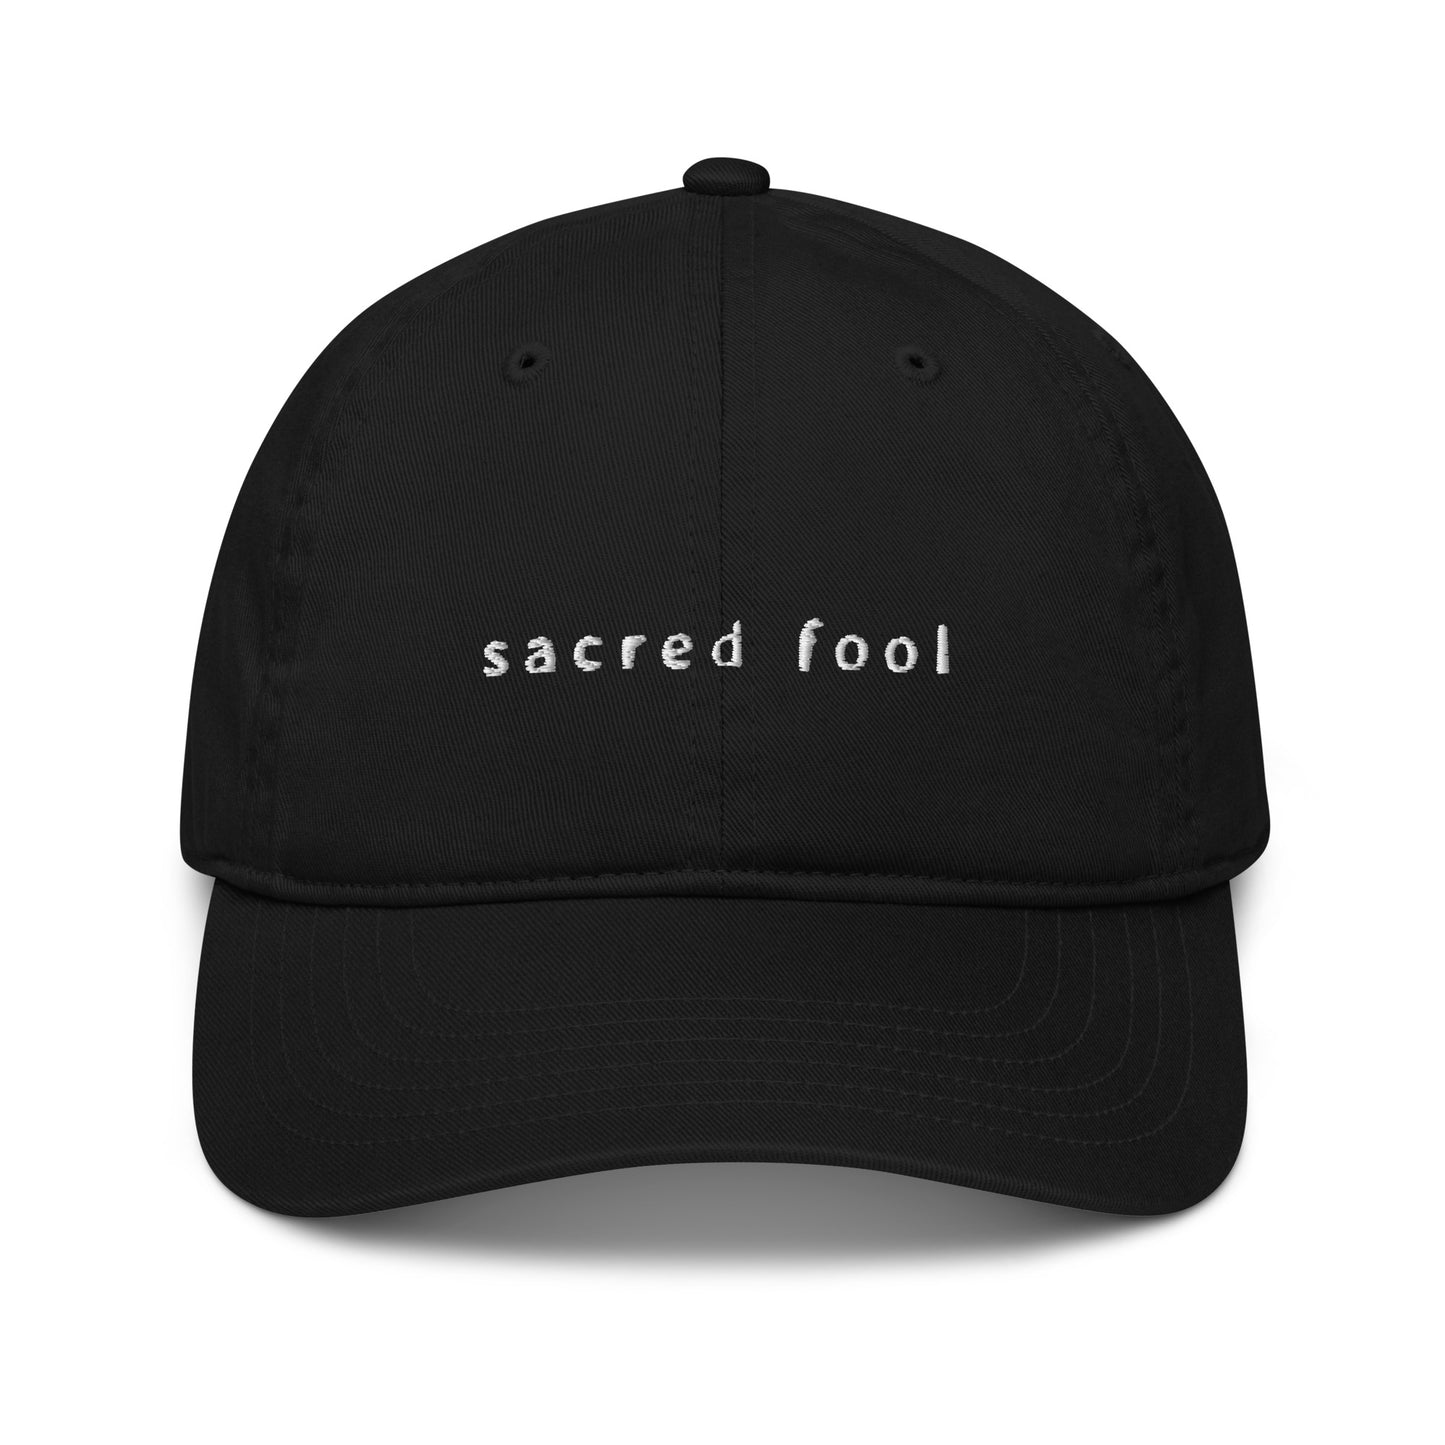 black organic cotton hat with white embroidered logo that reads SACRED FOOL in lowercase averia gruesa libre font